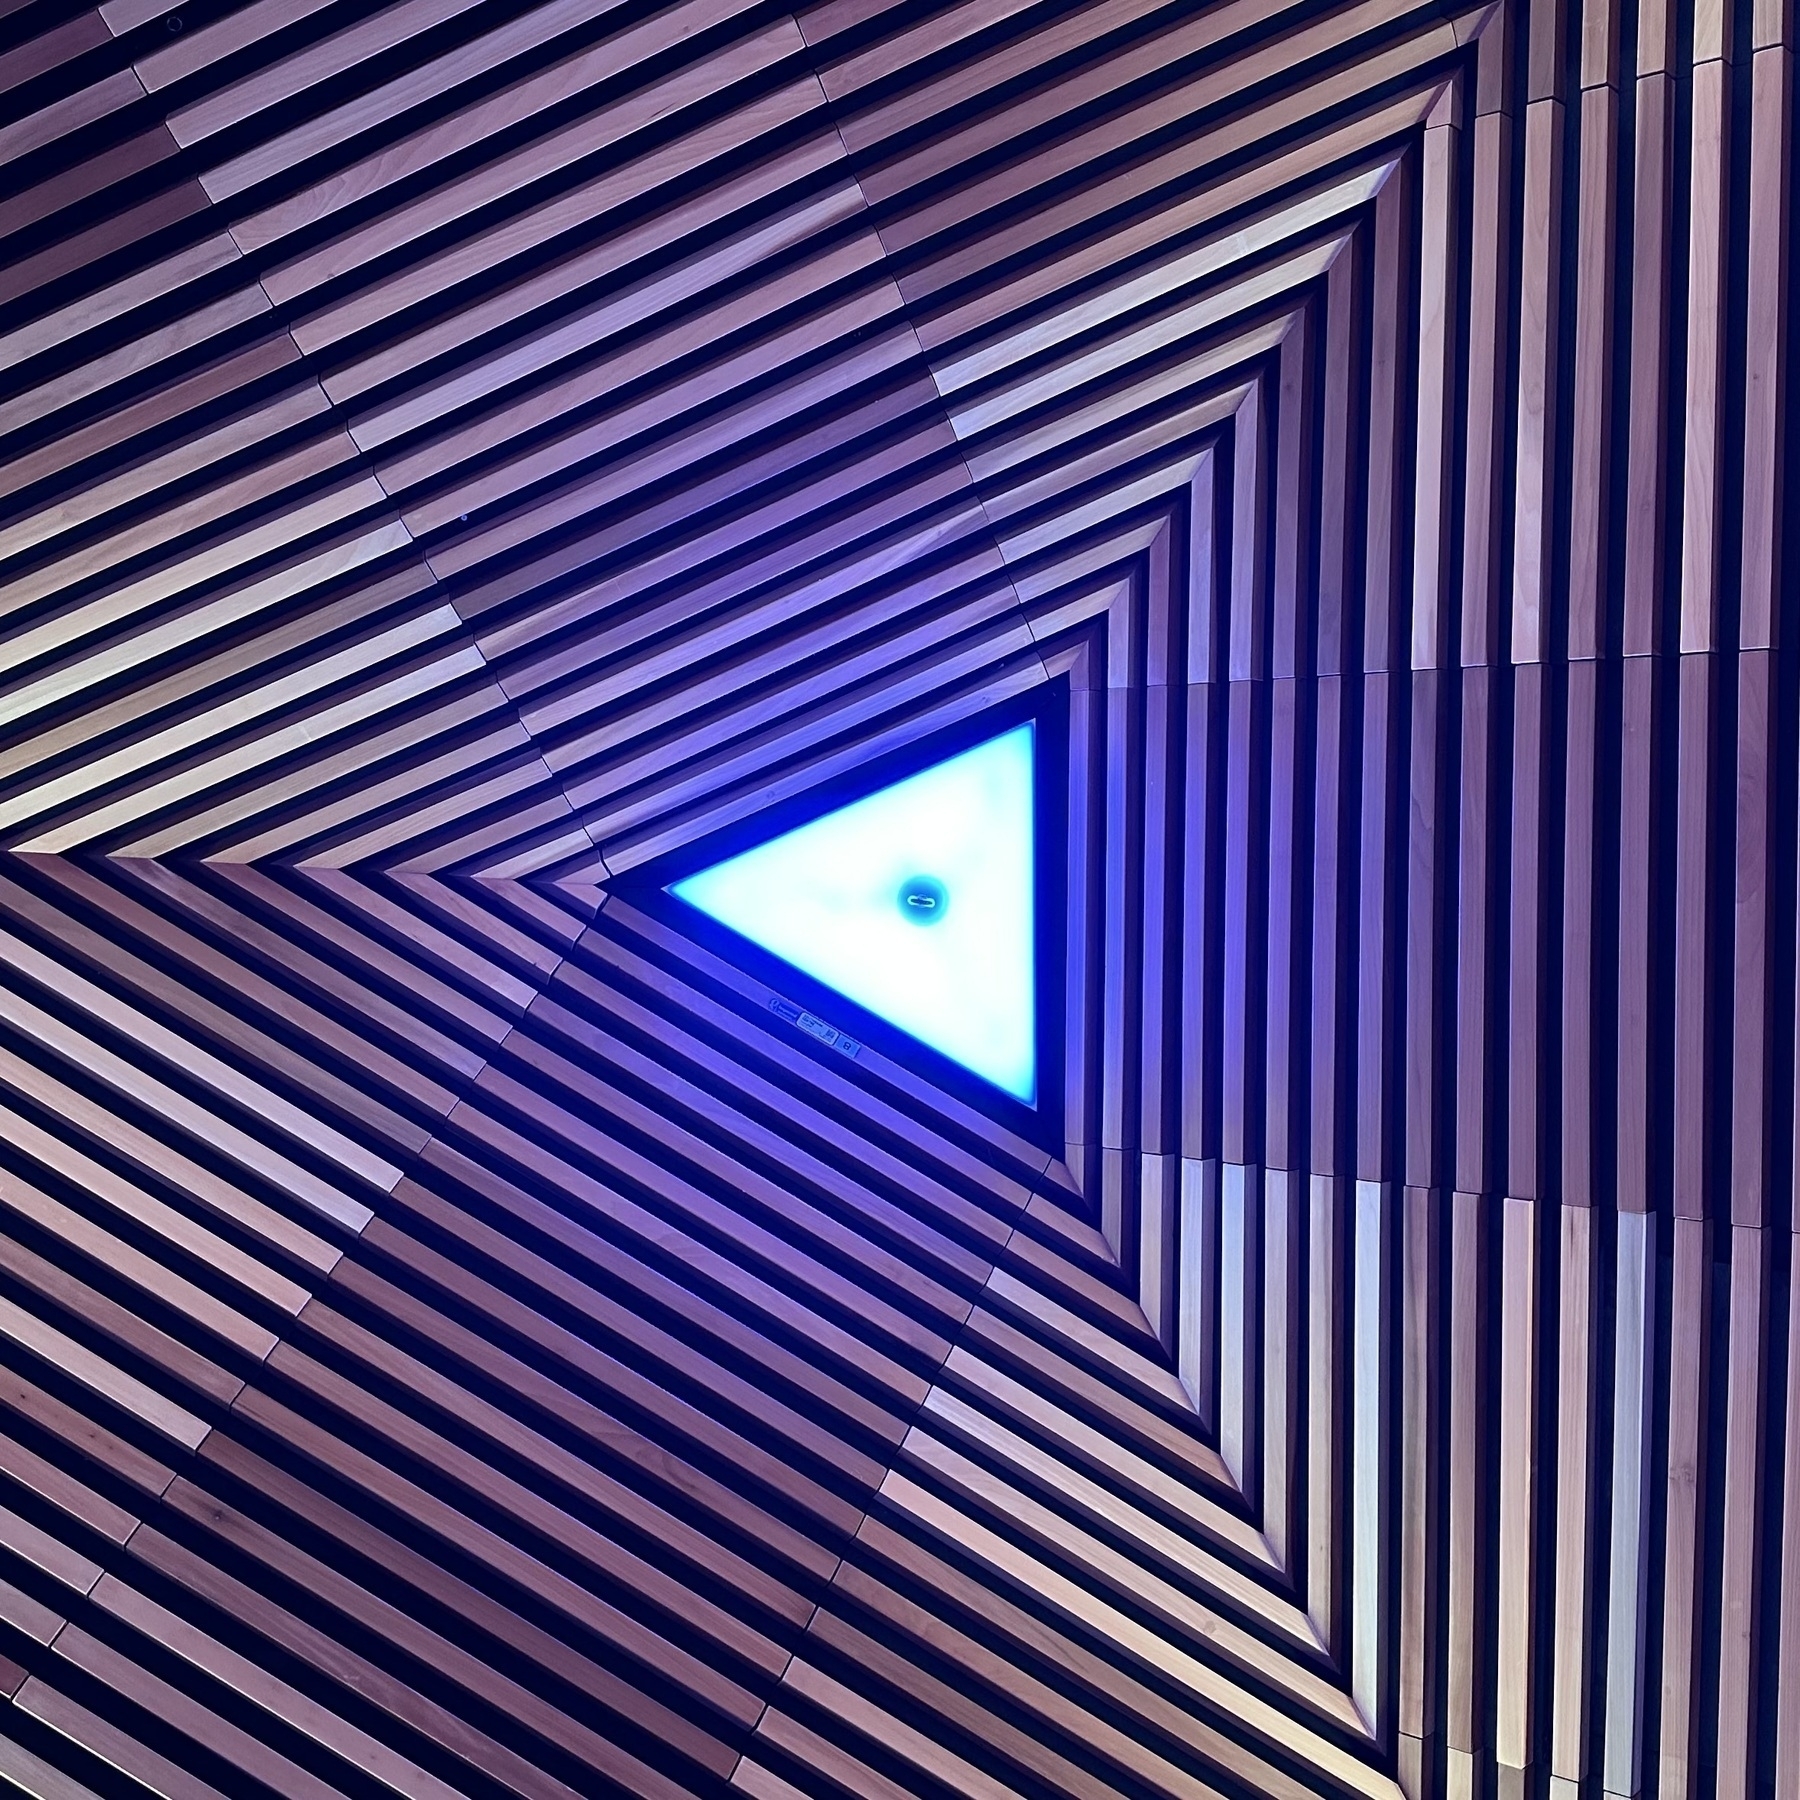 A triangular light surrounded by concentric wooden triangles.